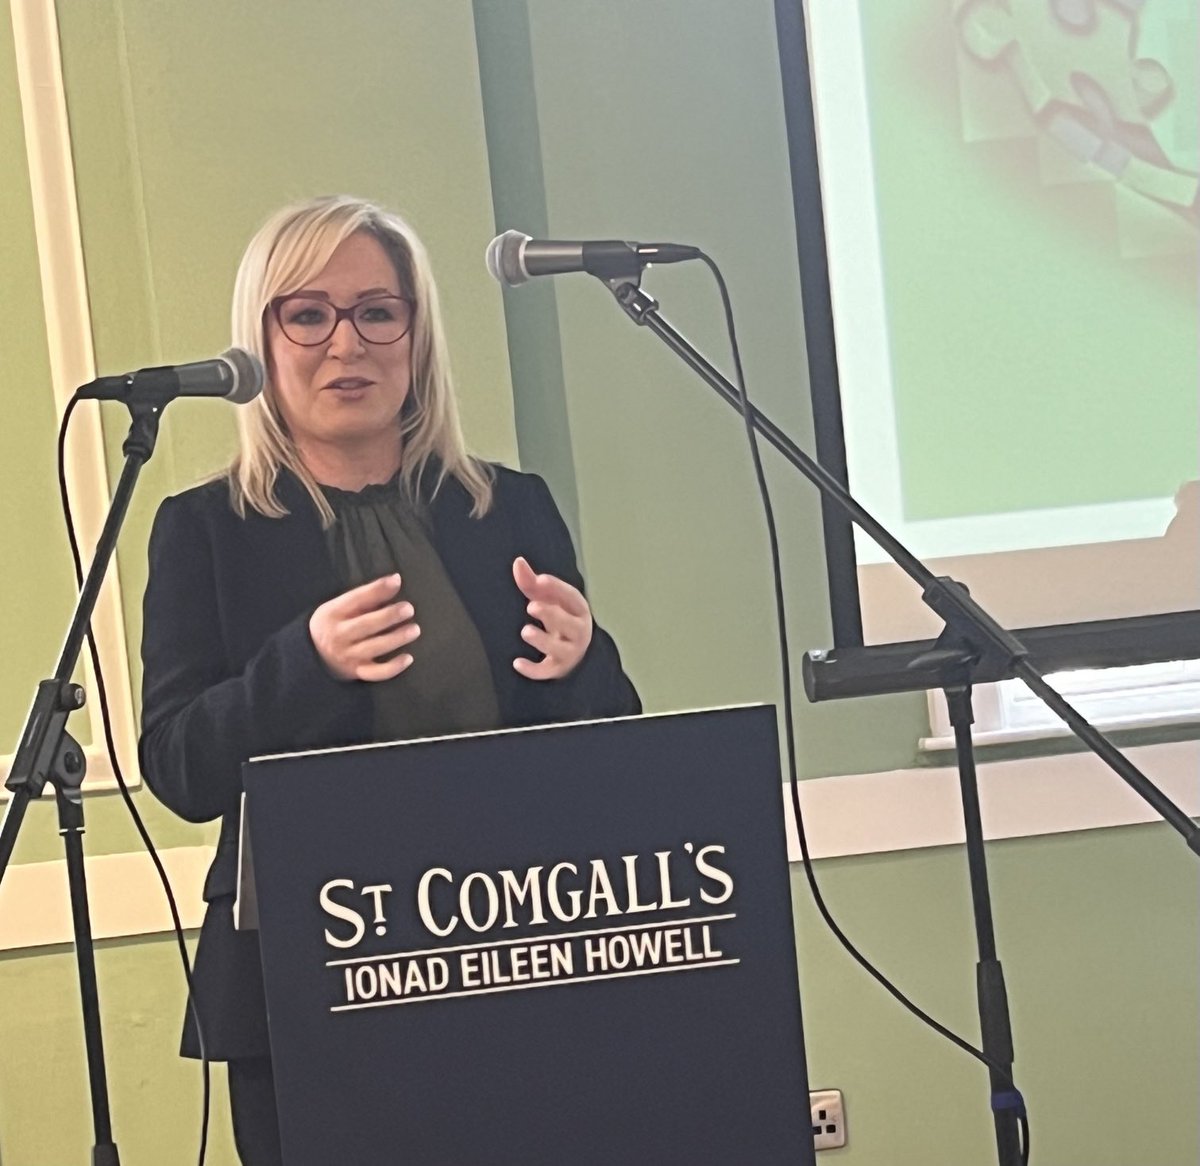 Michelle O Neill reflects on the need for society to tackle divisions. ‘Change is happening. The future is for everybody. Tackling sectarianism is a huge challenge. But we need to meet this challenge and move forward and unite on the basis of equality’.